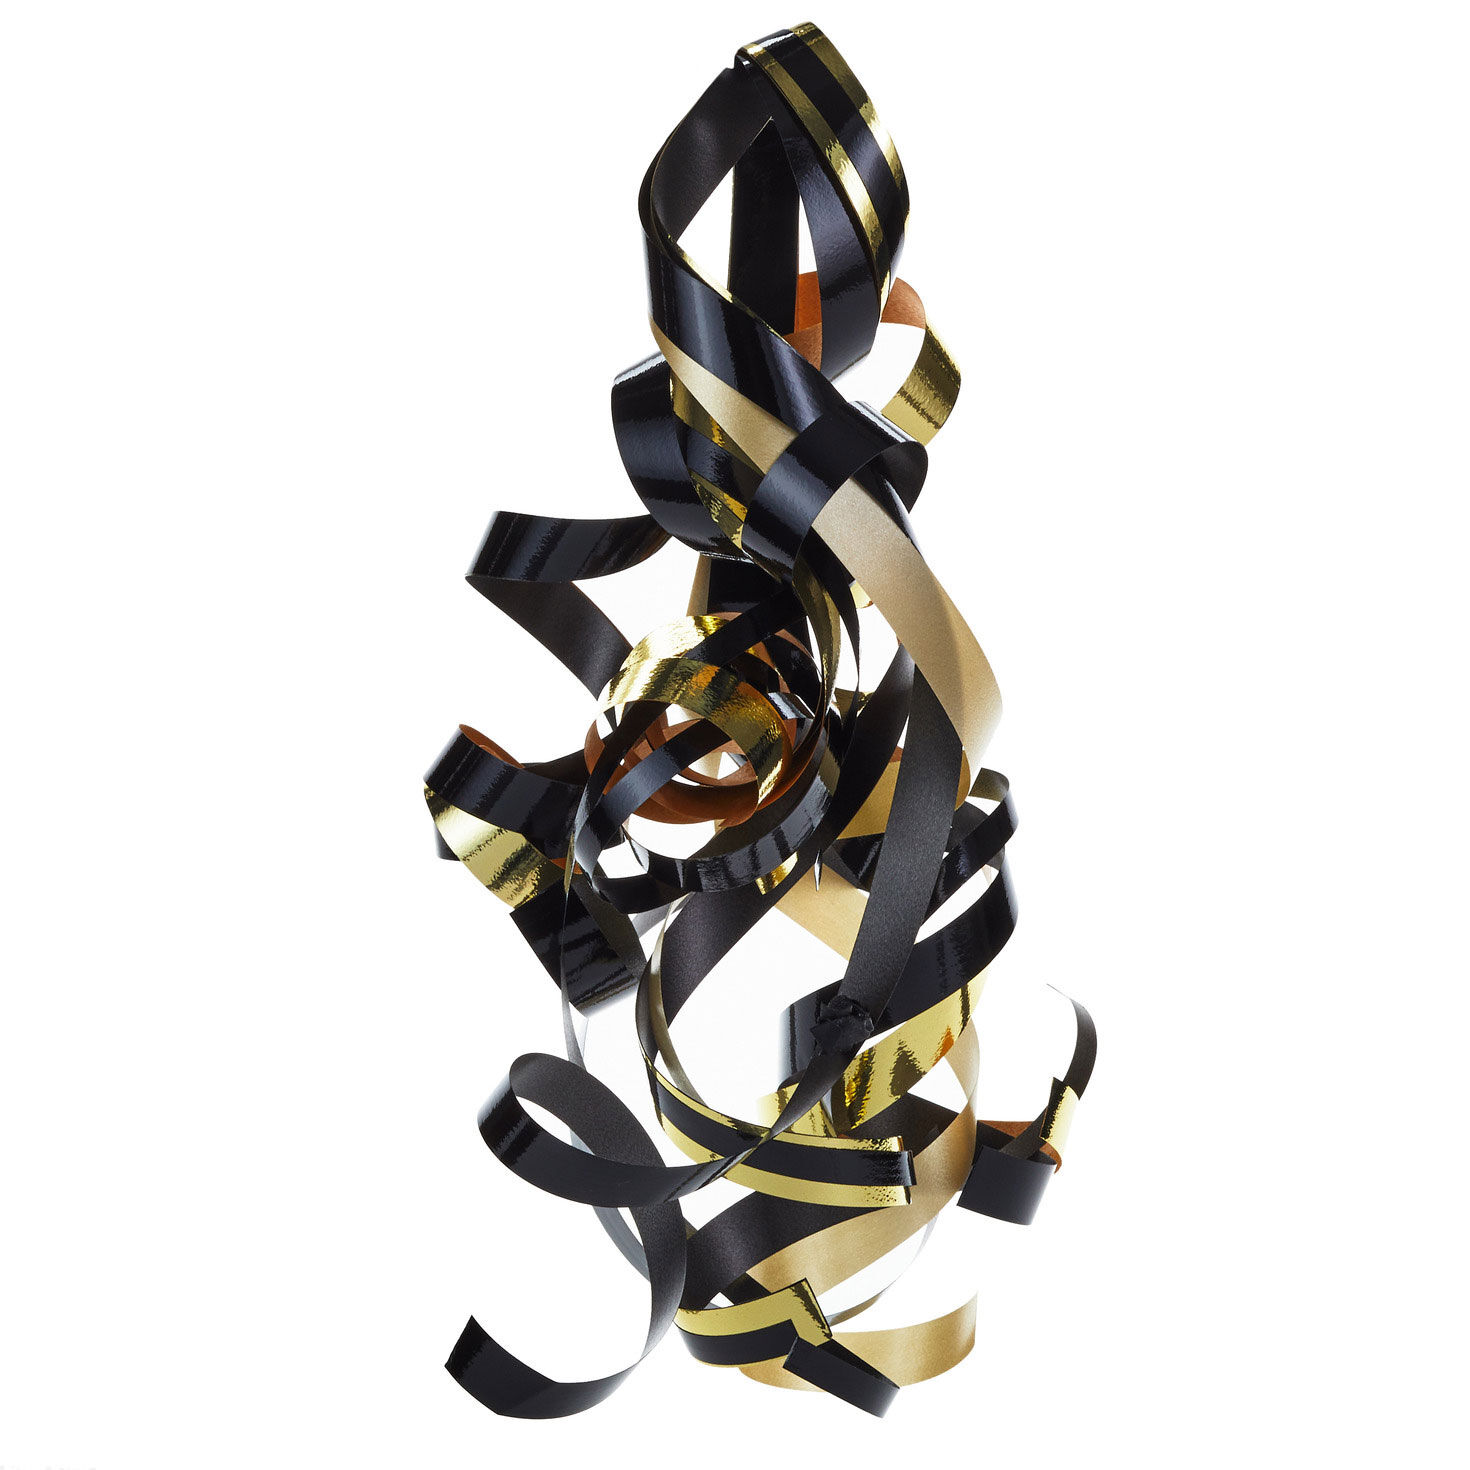 Black/Gold Curly Ribbon Gift Bow, 4.6" for only USD 1.99 | Hallmark